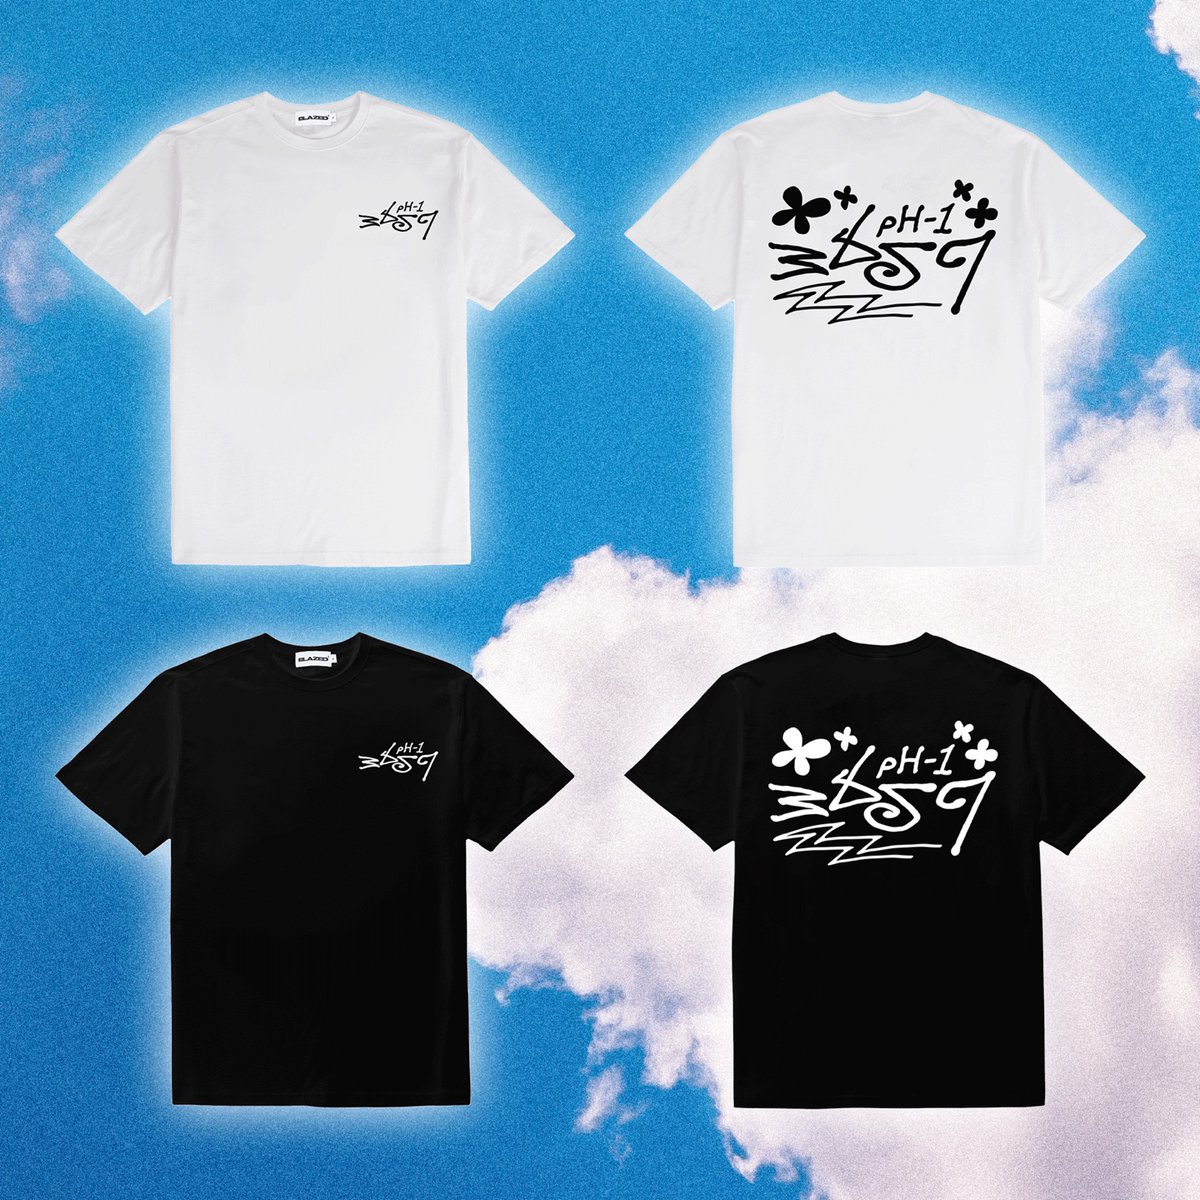 H1ghr Music Ph 1 365 7 Merchandise Limited Sales Open Merchandise Short Sleeve Black White Tie Dye Short Sleeve Sky Online Sites T Co Ufabpeloag International Shipping And Payment Are Currently Unavailable Ph1